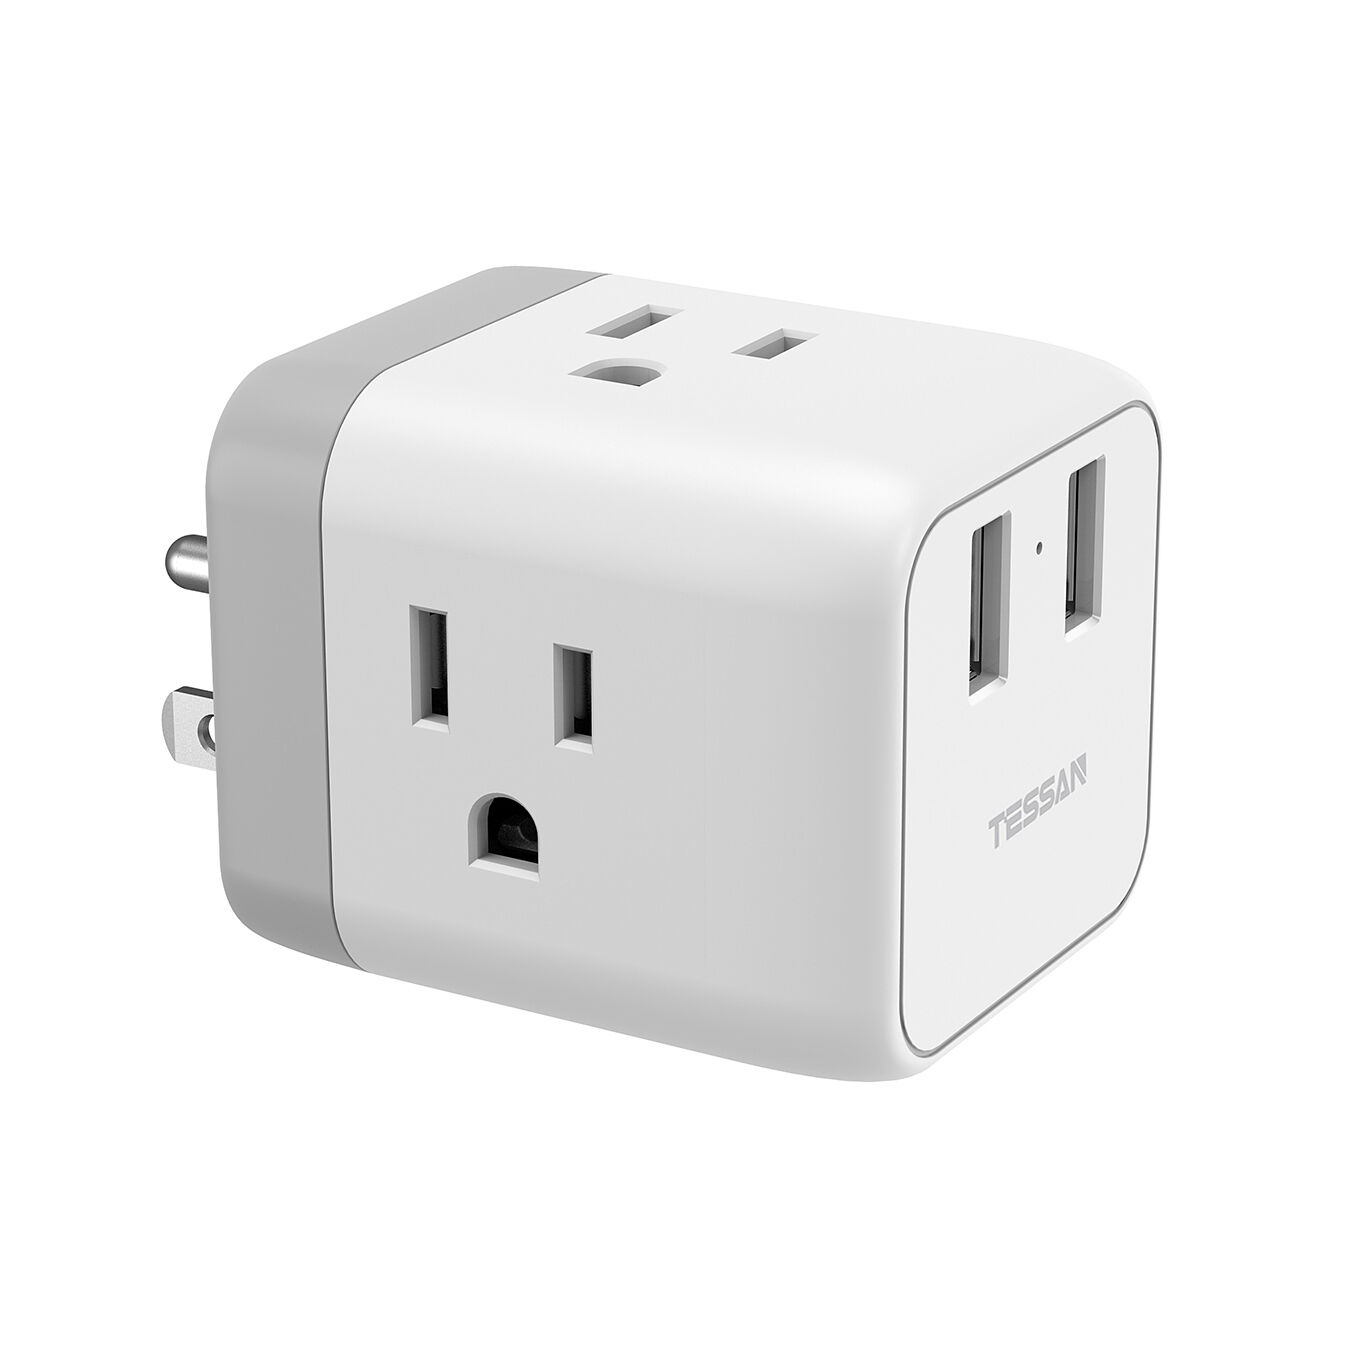 TESSAN USB Plug Adapter Multi Outlets with 3 Way Sockets 3 USB